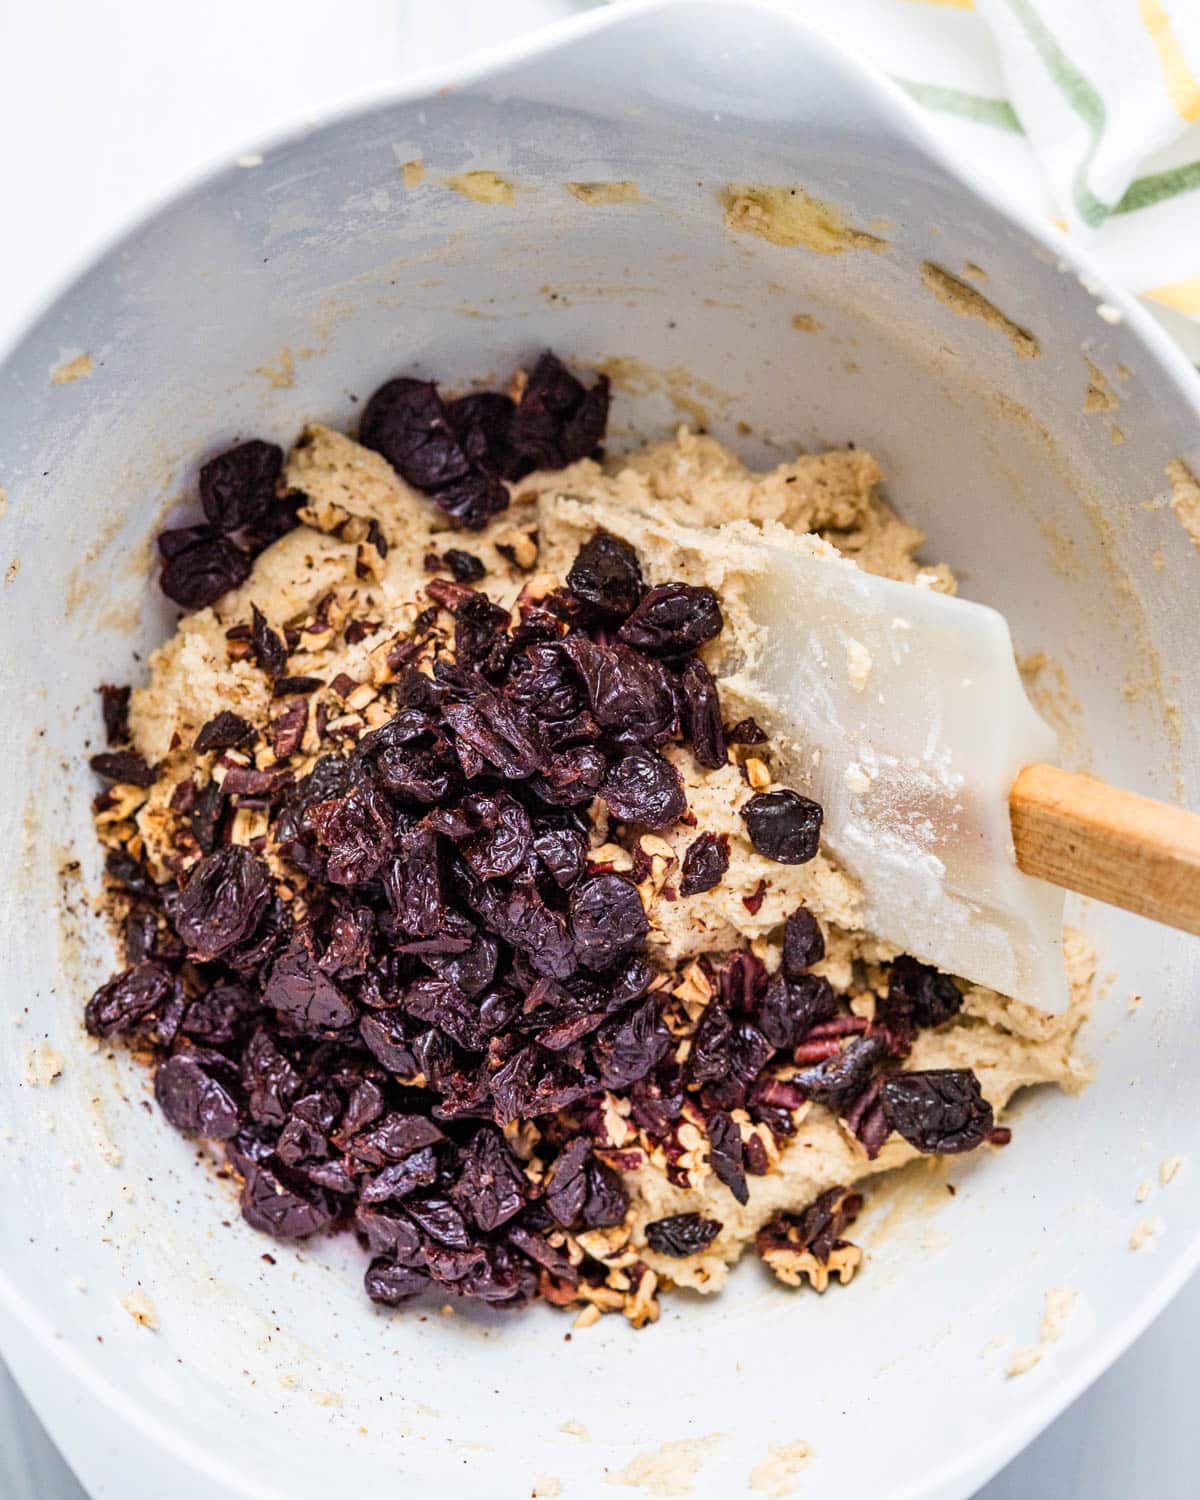 I am stirring dried cherries and toasted pecans into the cookie dough.